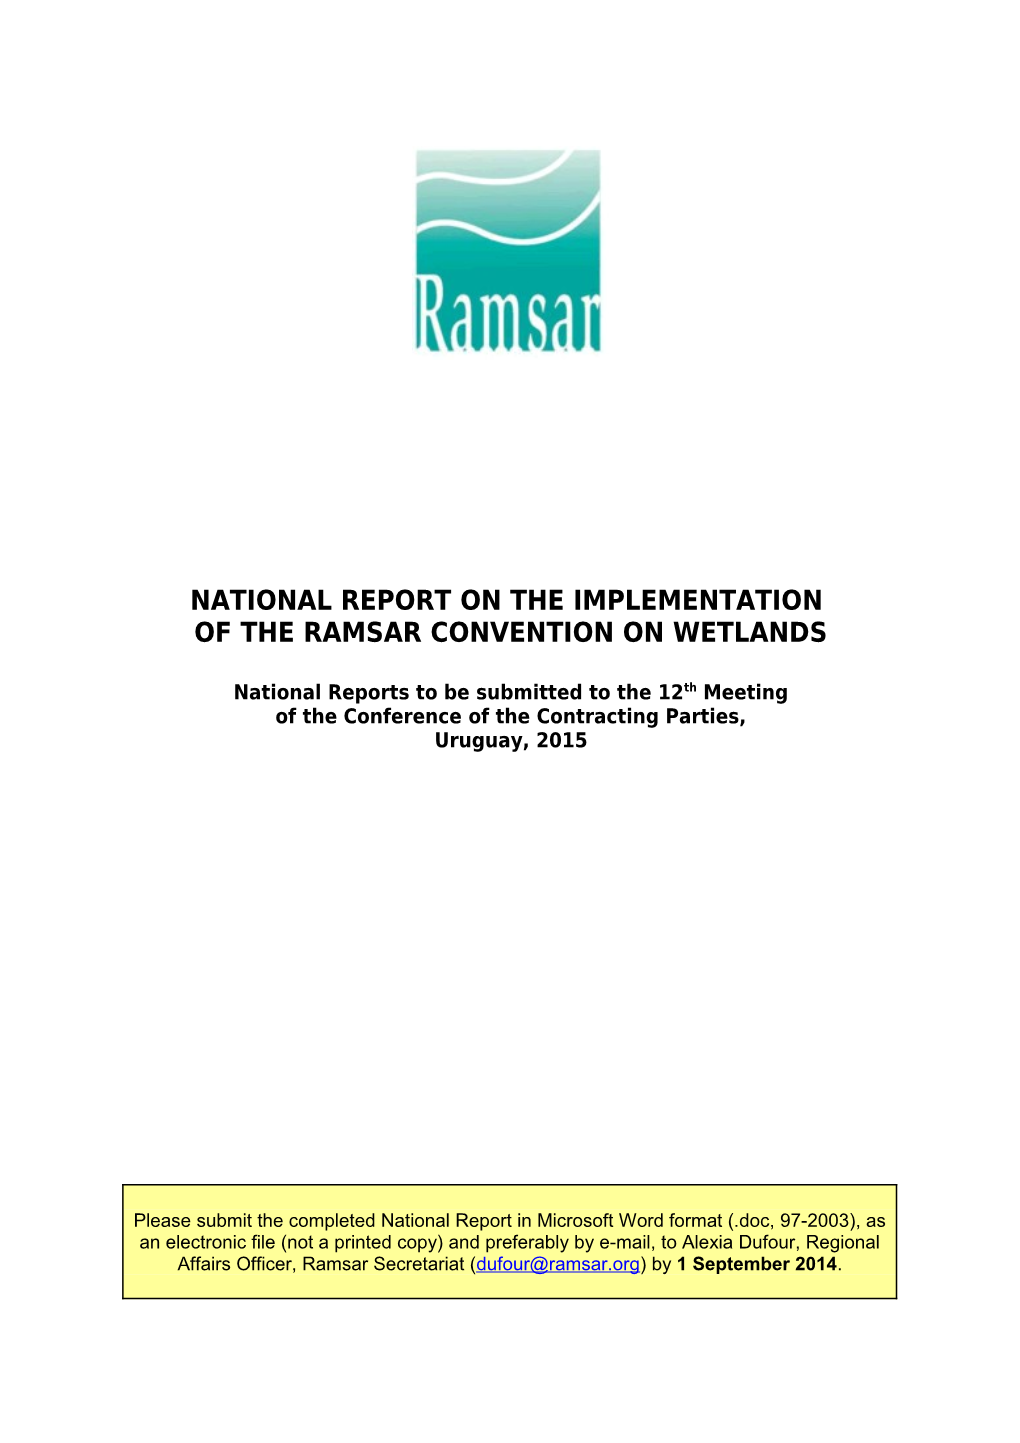 National Report Format for Ramsar COP12, Page 1